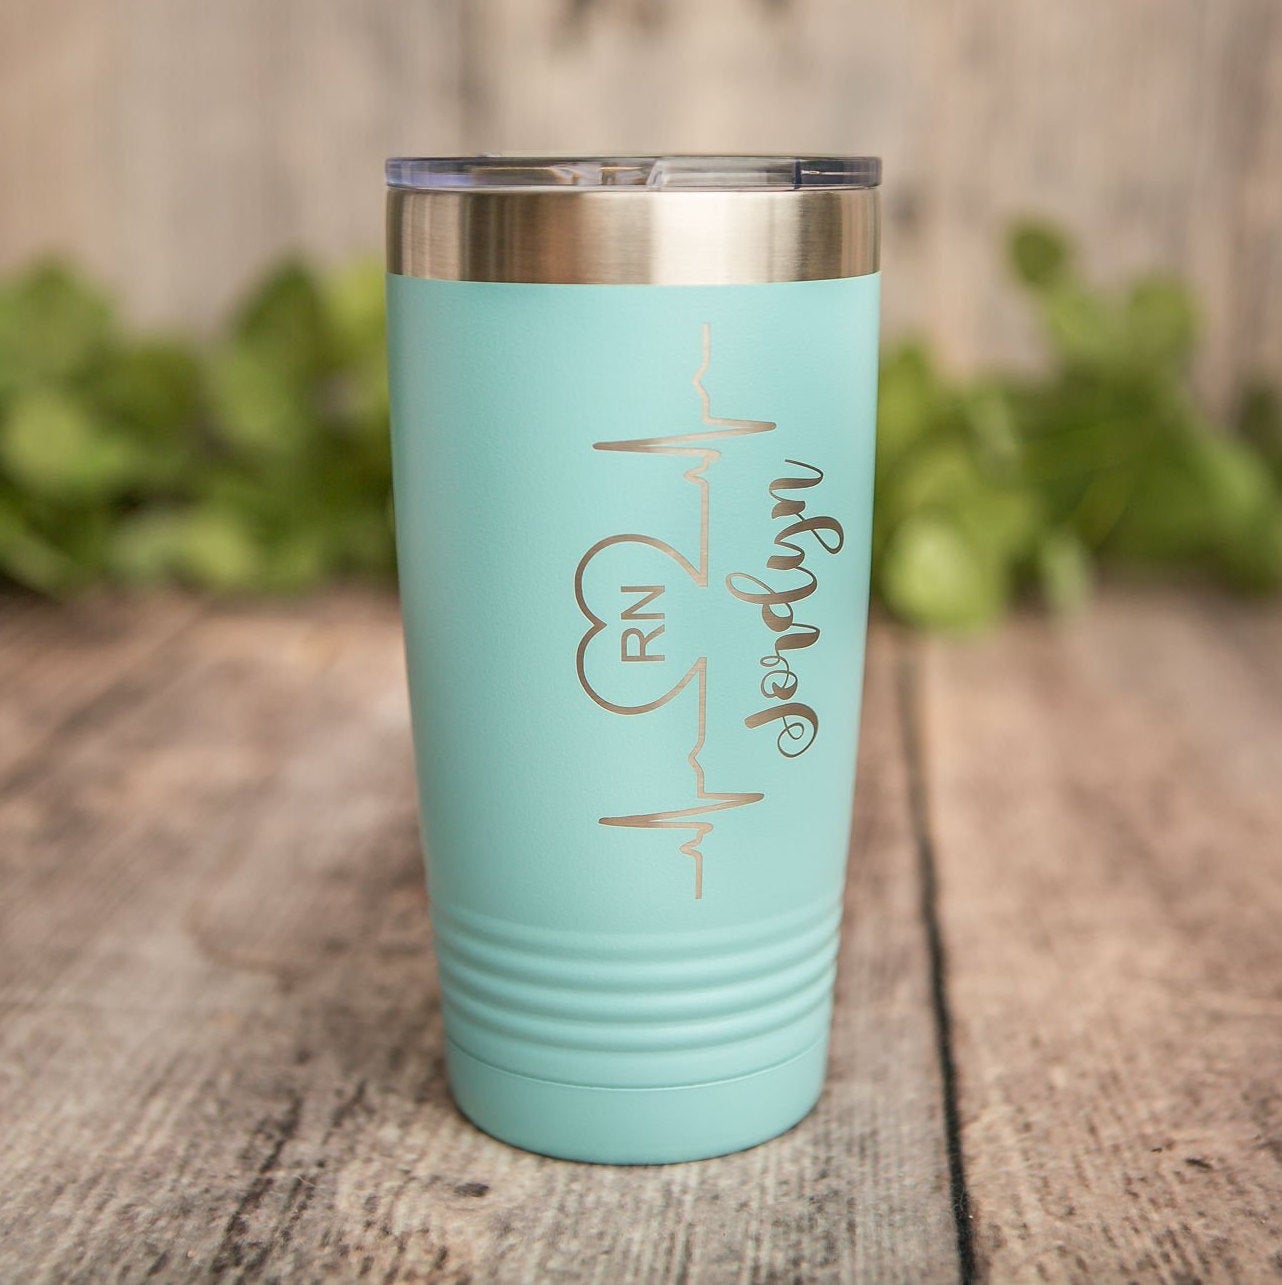 https://3cetching.com/wp-content/uploads/2020/09/personalized-engraved-nurse-tumbler-cup-nurse-graduation-gift-5f5fb538.jpg